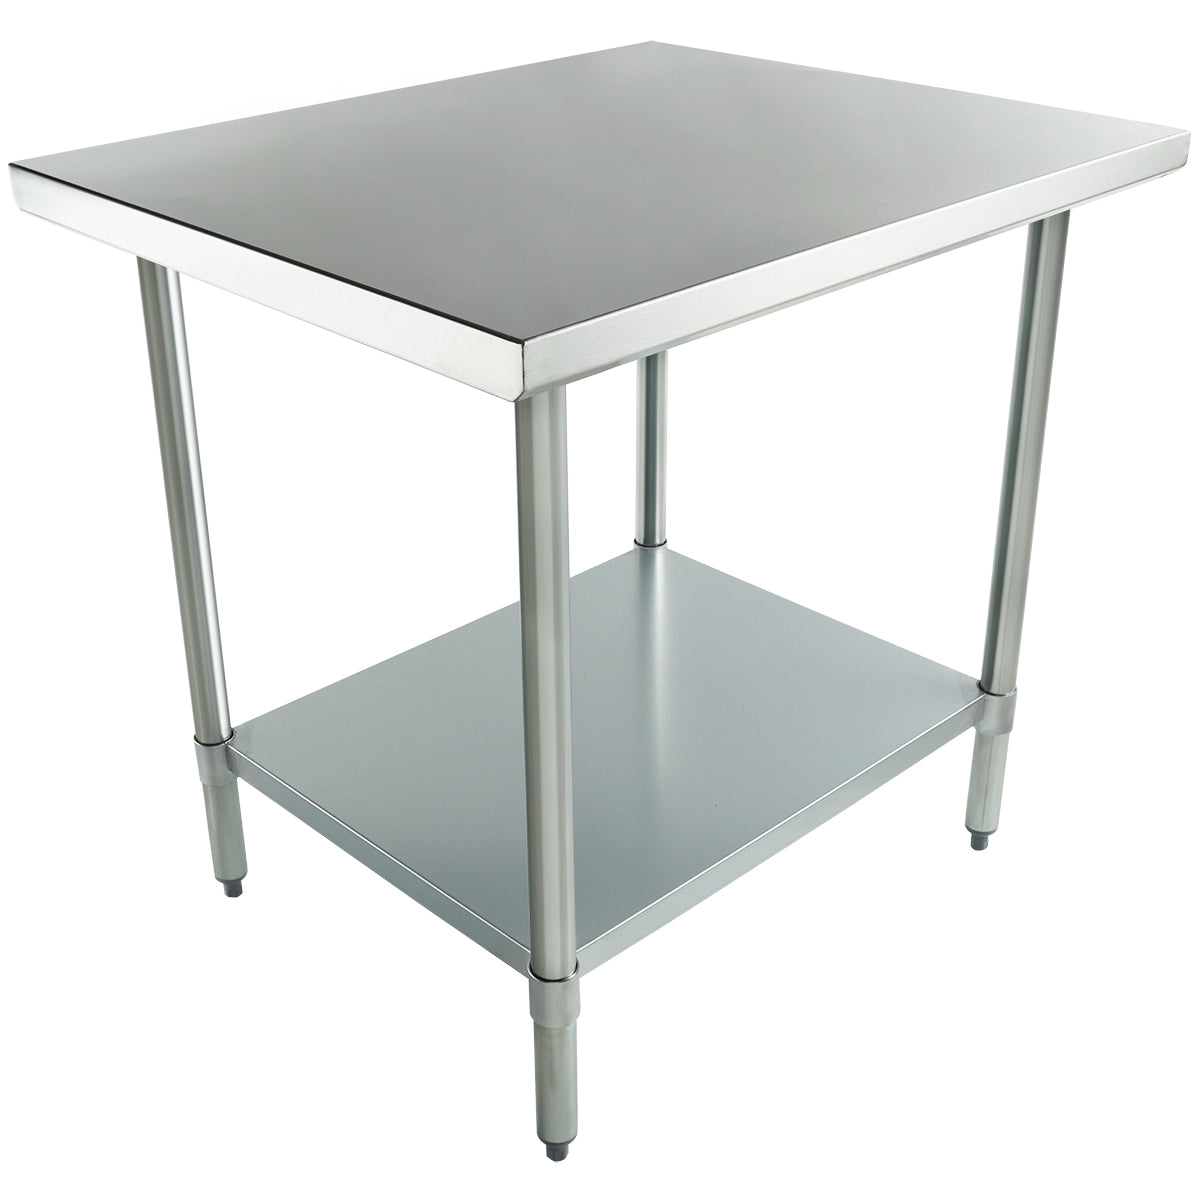 Empura 36" x 30" 18-Gauge 304 Stainless Steel Commercial Work Table with Flat Top Galvanized Legs and Undershelf